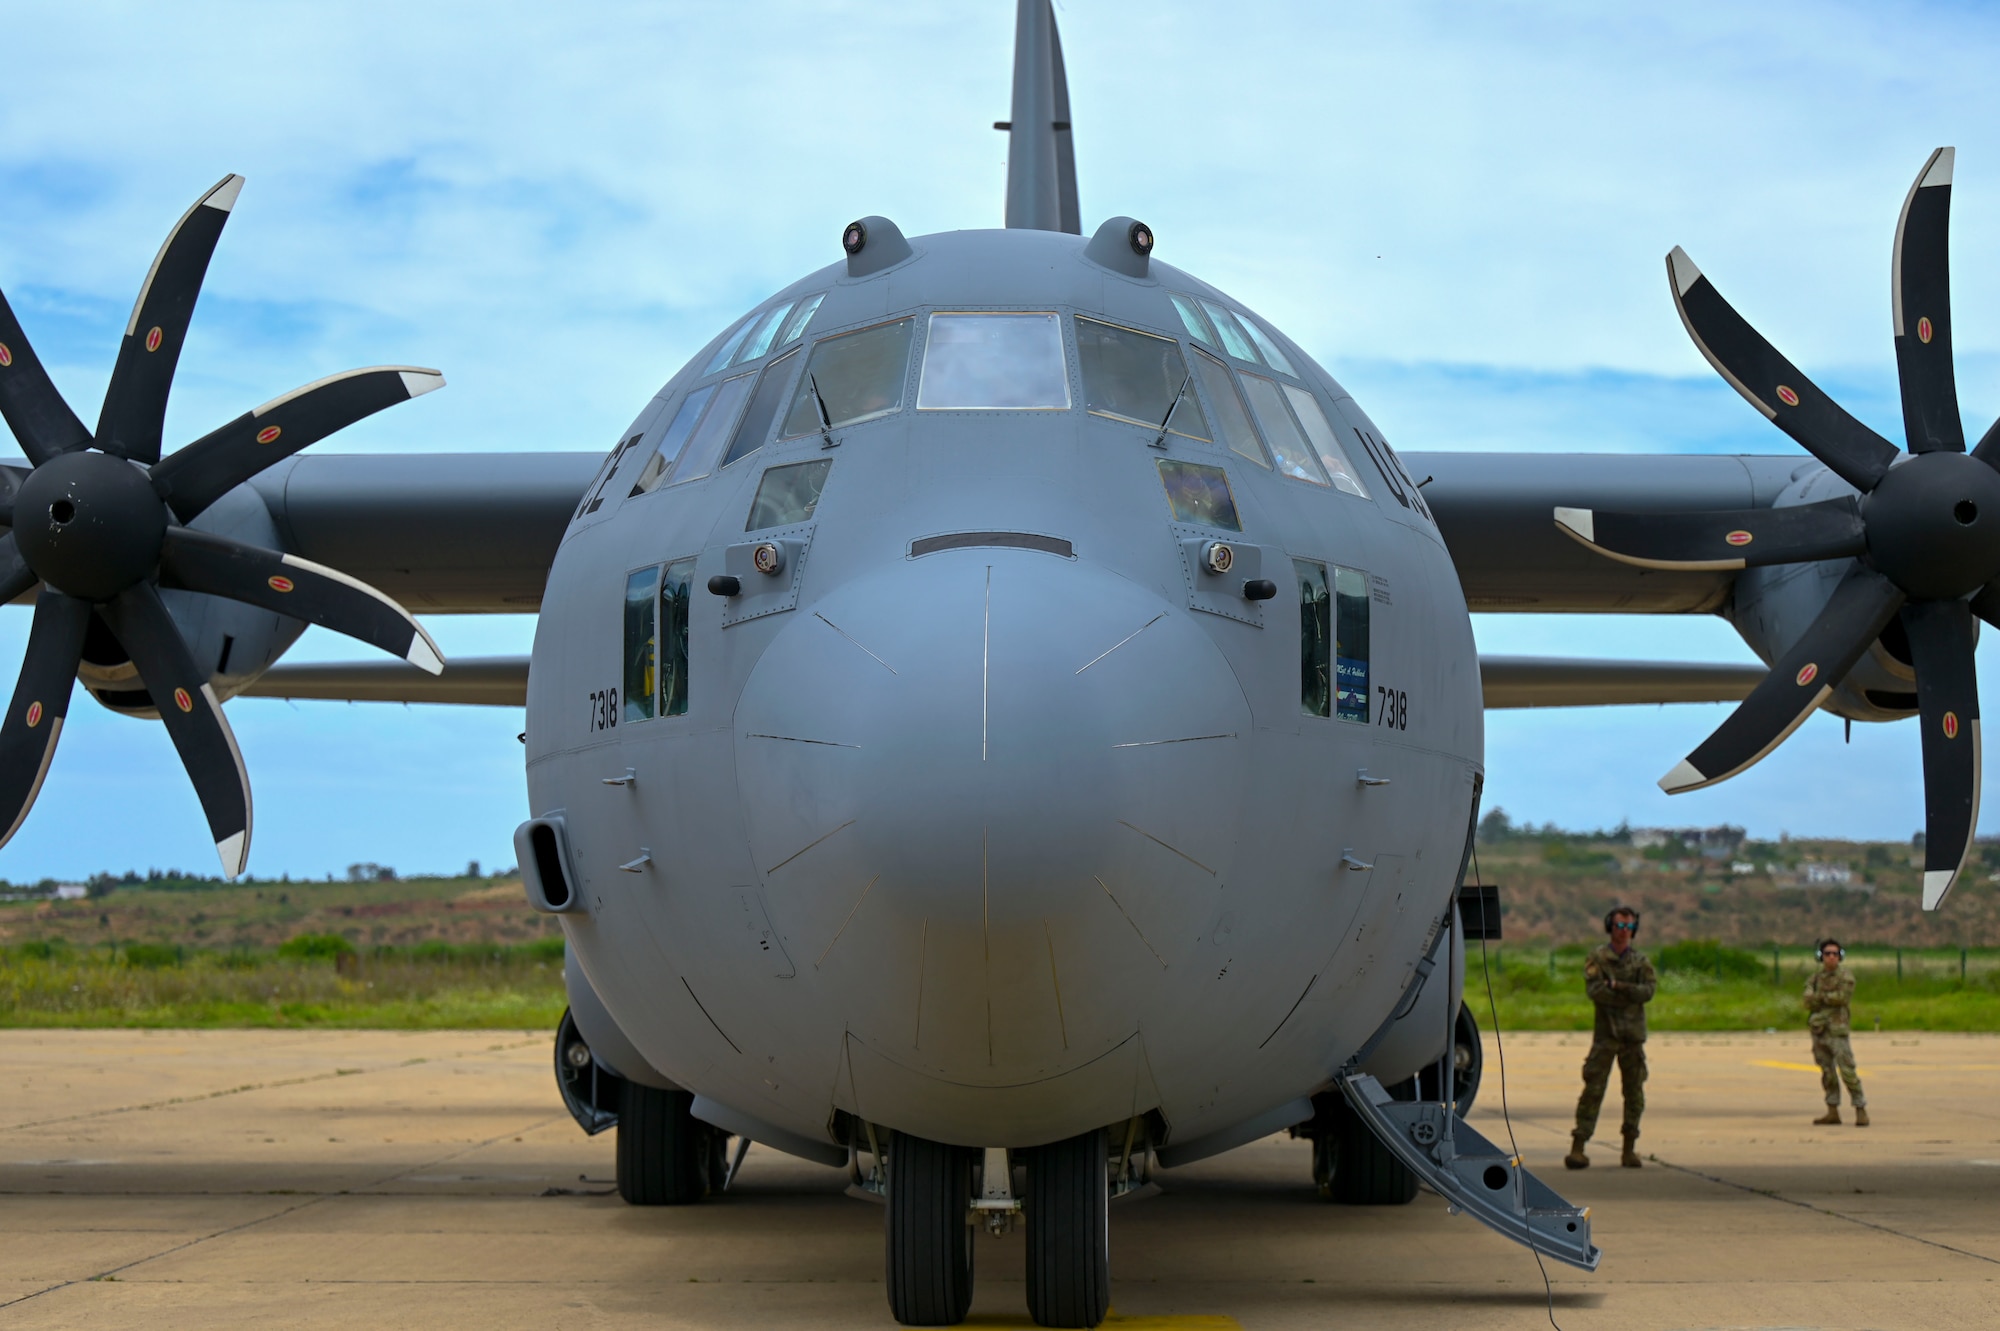 A U.S. Air Force C-130H3 Hercules assigned to Peterson Space Force Base, sits on the flight line during exercise African Lion 24 at Kenitra Air Base, Morocco, May 19, 2024.  While military personnel from both the United States and Morocco are participating in this exercise, more than 8,000 multinational service members from 27 countries will also participate. (U.S. Air Force photo by Senior Airman Jenna A. Bond)